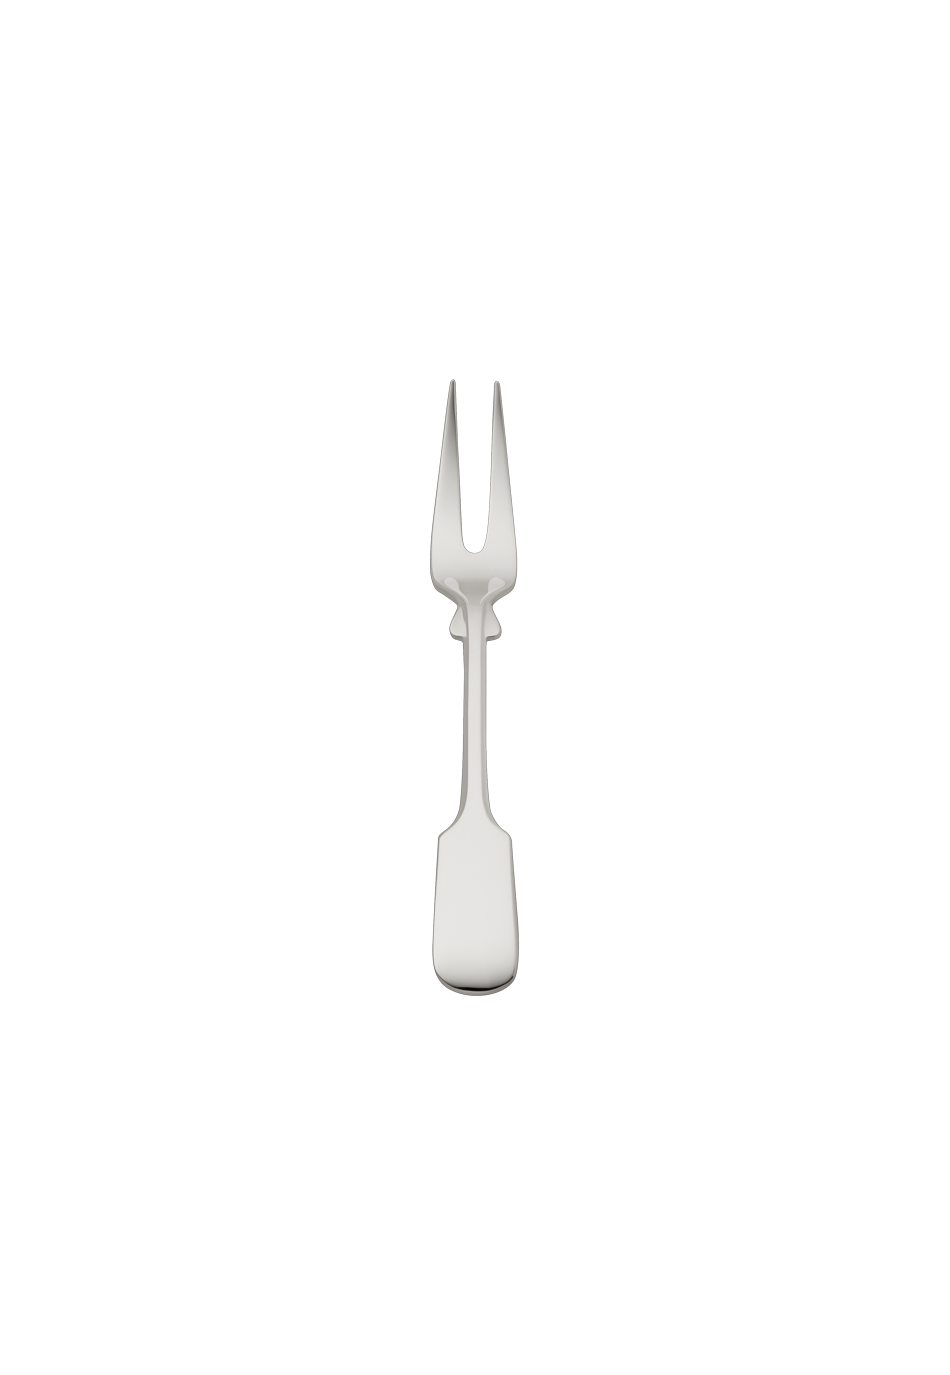 Alt-Spaten Meat Fork, small (150g massive silverplated)